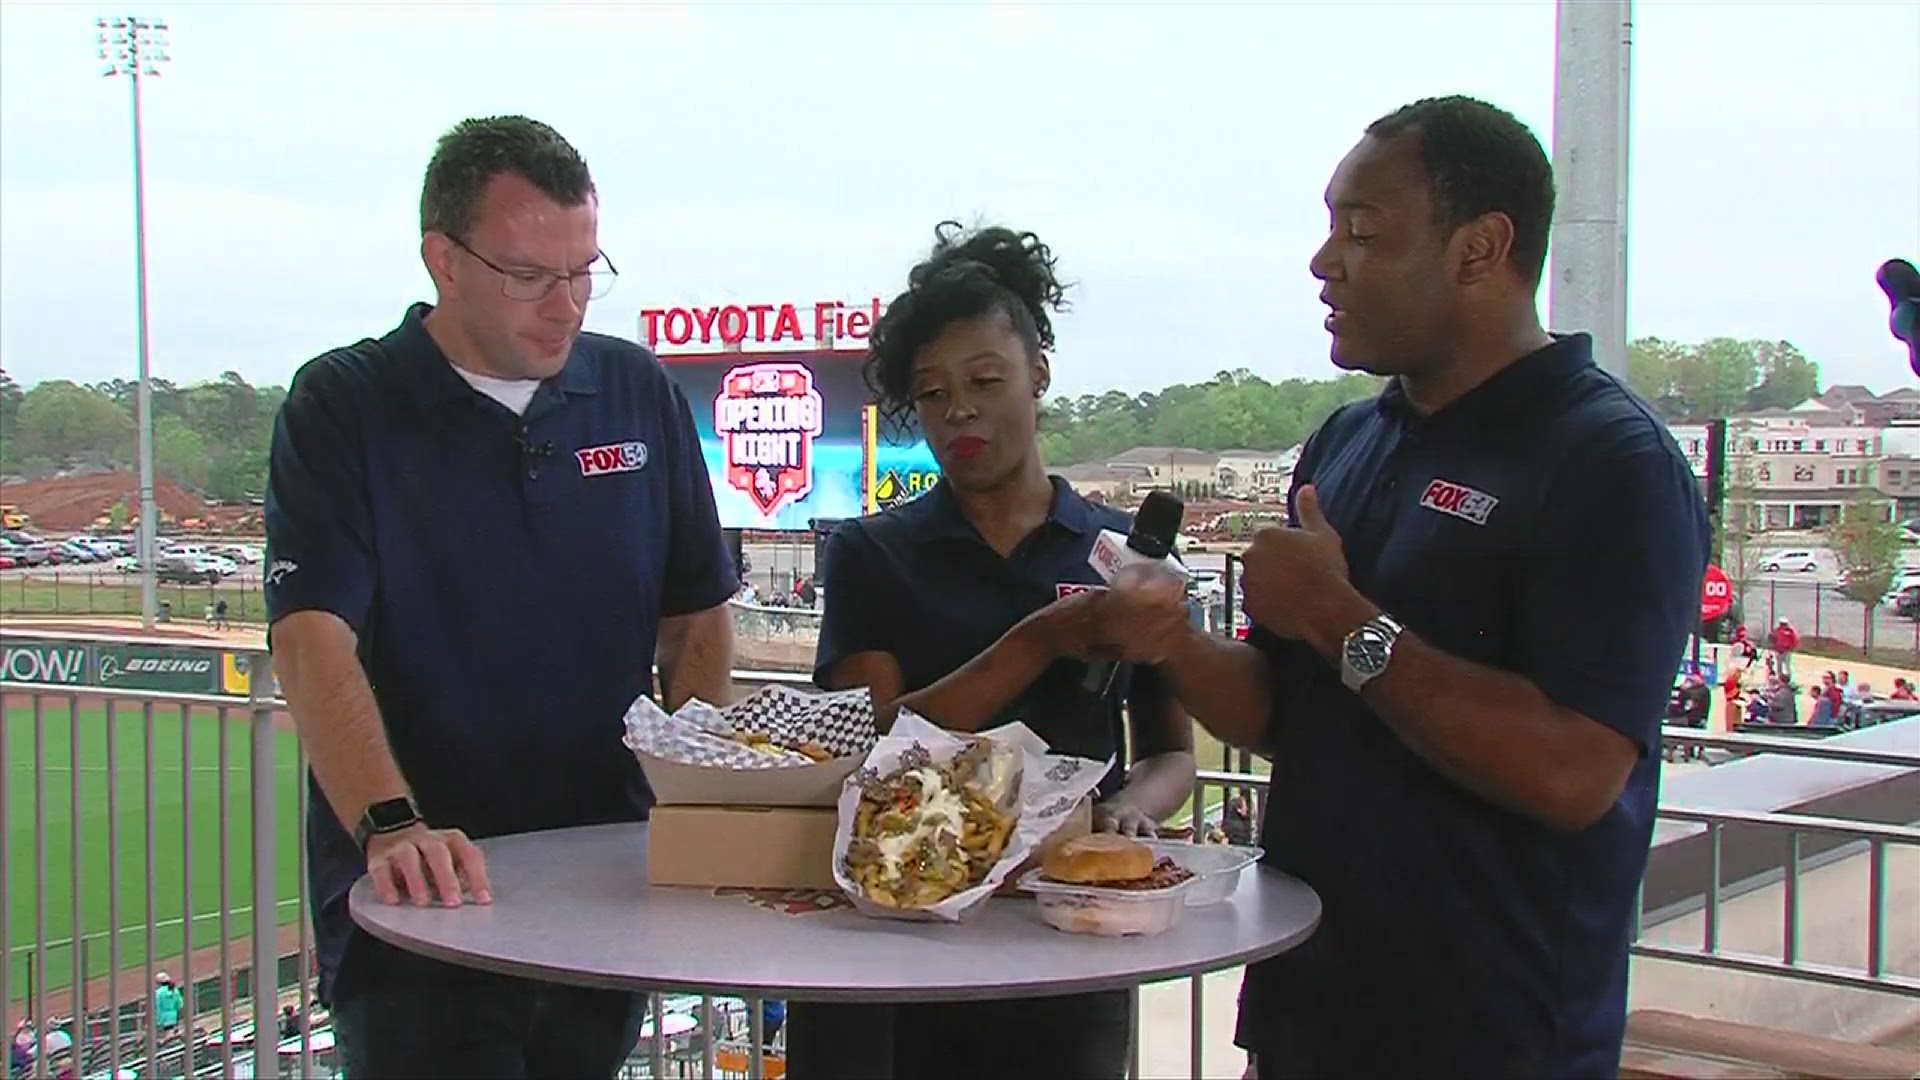 FOX54's crew tries out some of the new fare and ballpark standards you can nosh on while watching the Trash Pandas play!